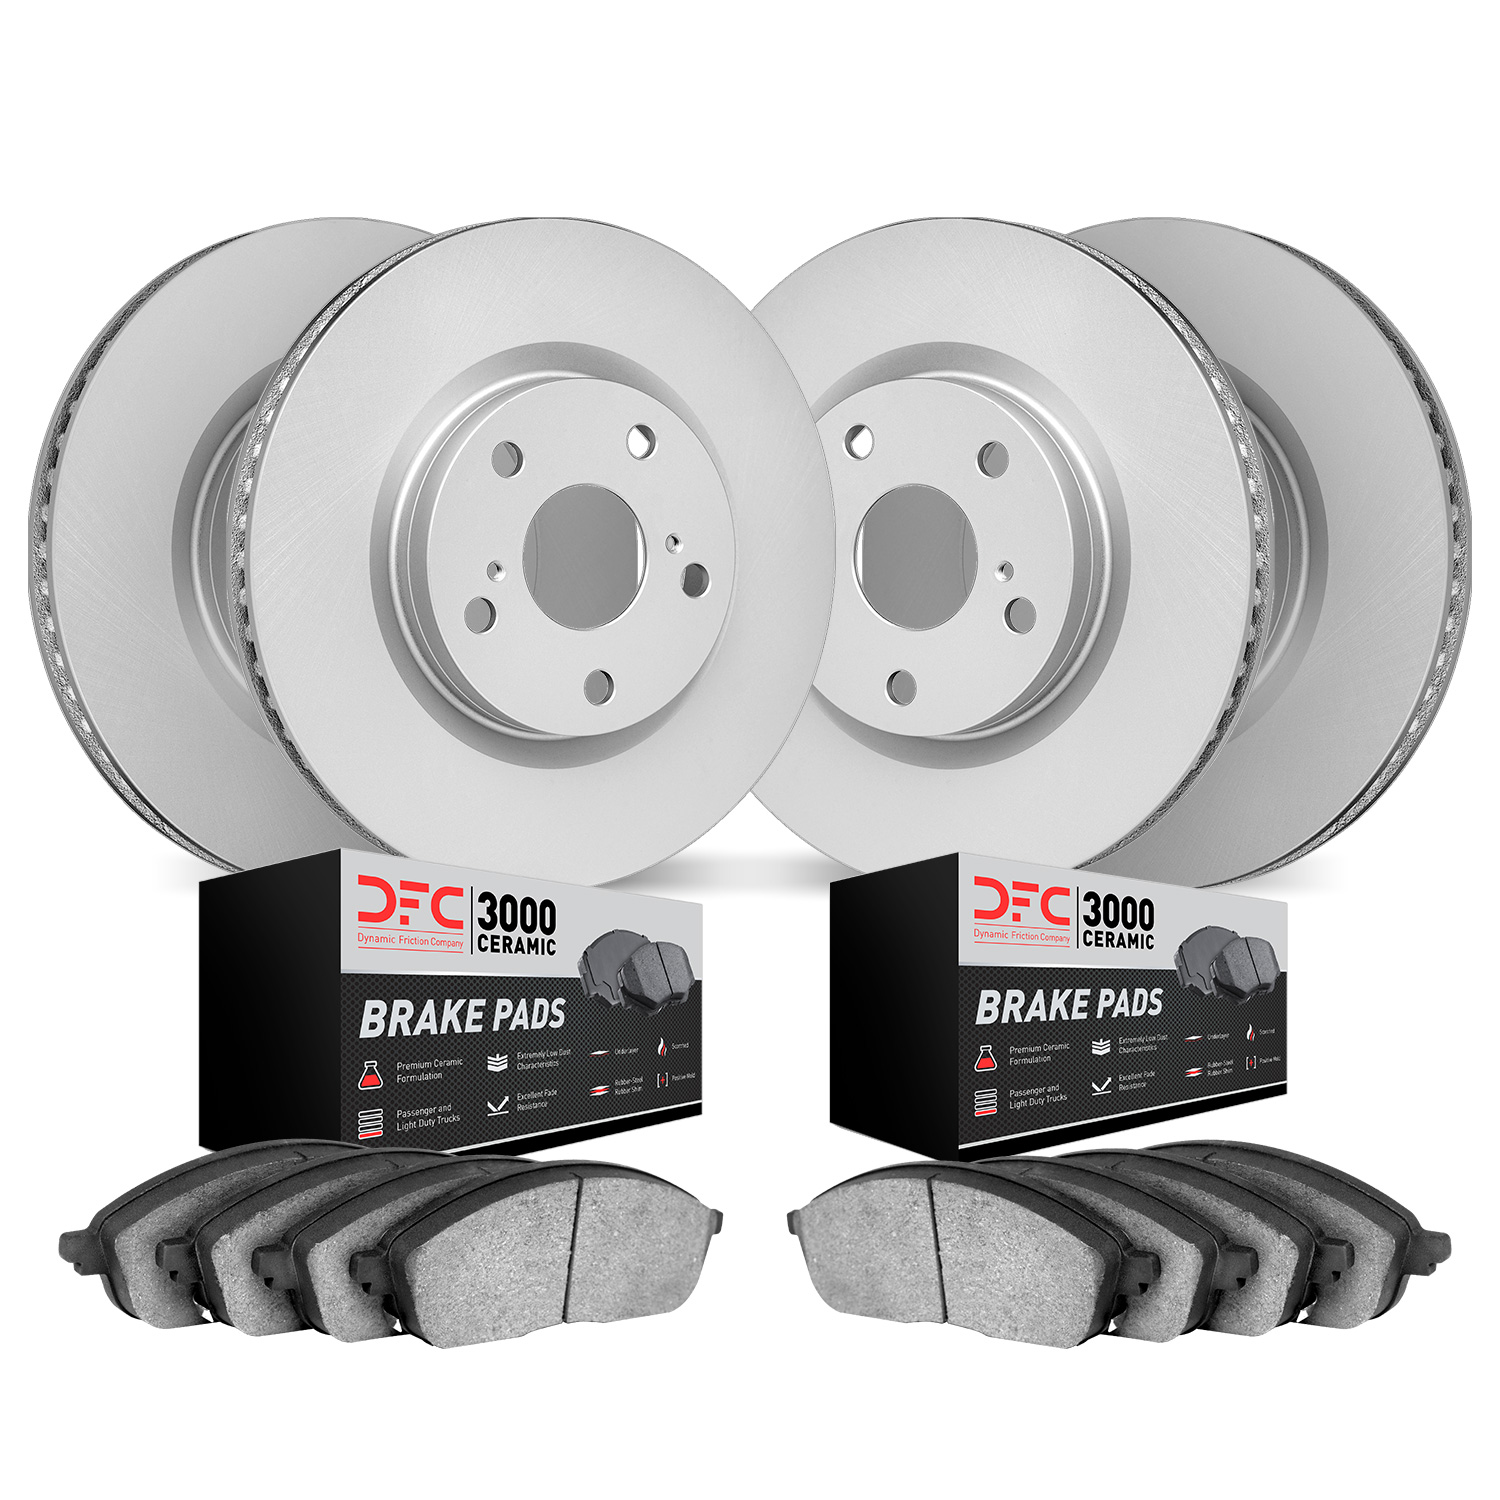 4304-68001 Geospec Brake Rotors with 3000-Series Ceramic Brake Pads Kit, 2003-2005 Infiniti/Nissan, Position: Front and Rear